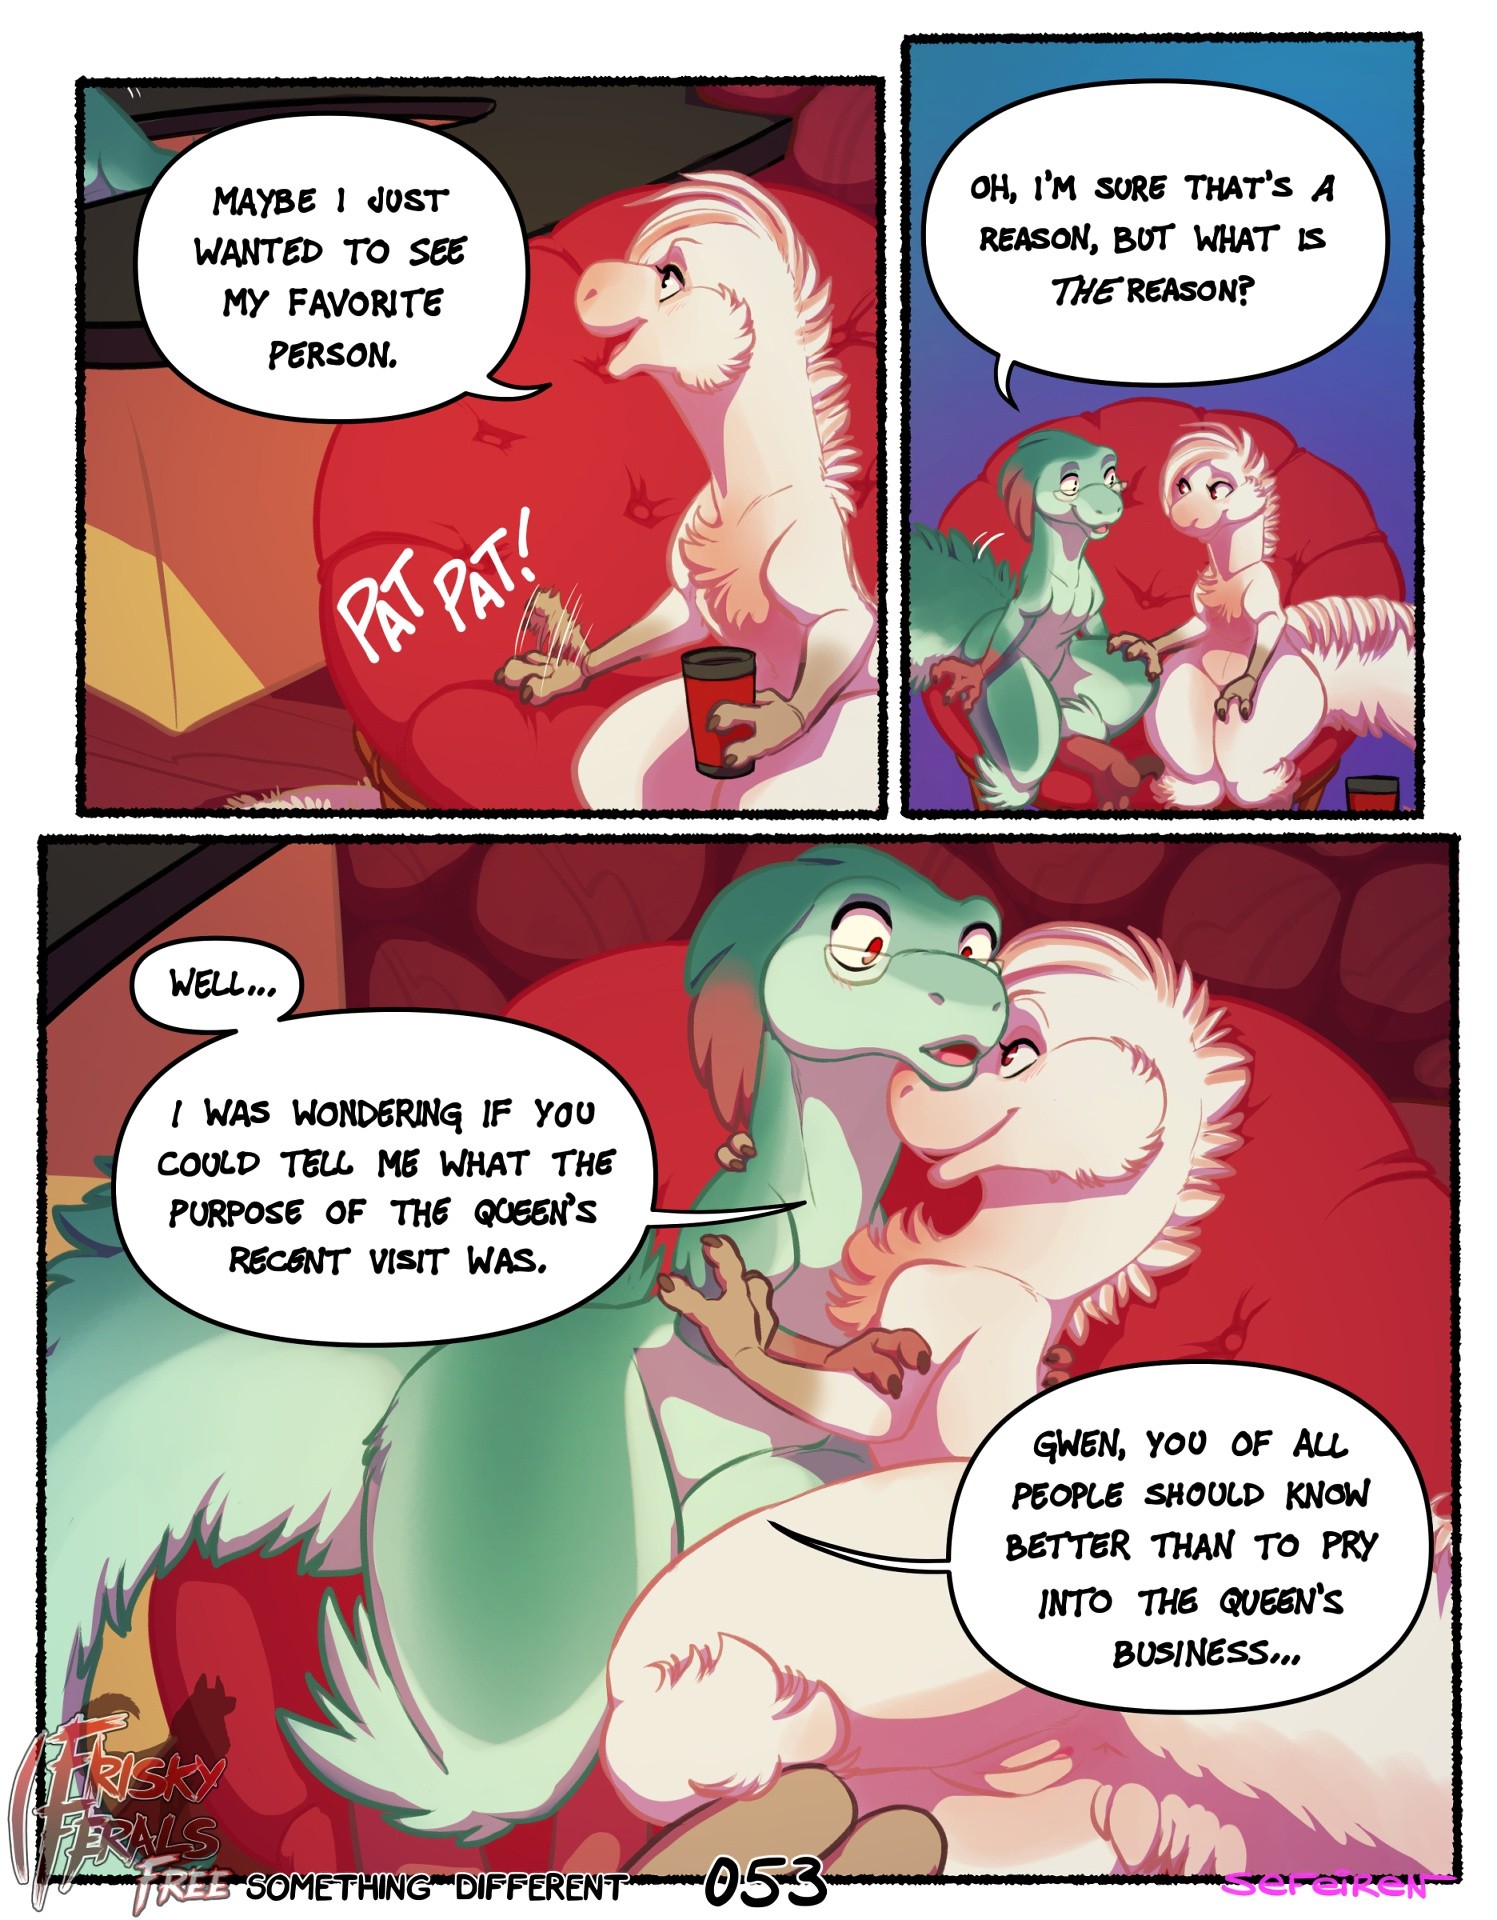 Frisky Ferals - Something Different porn comic picture 53